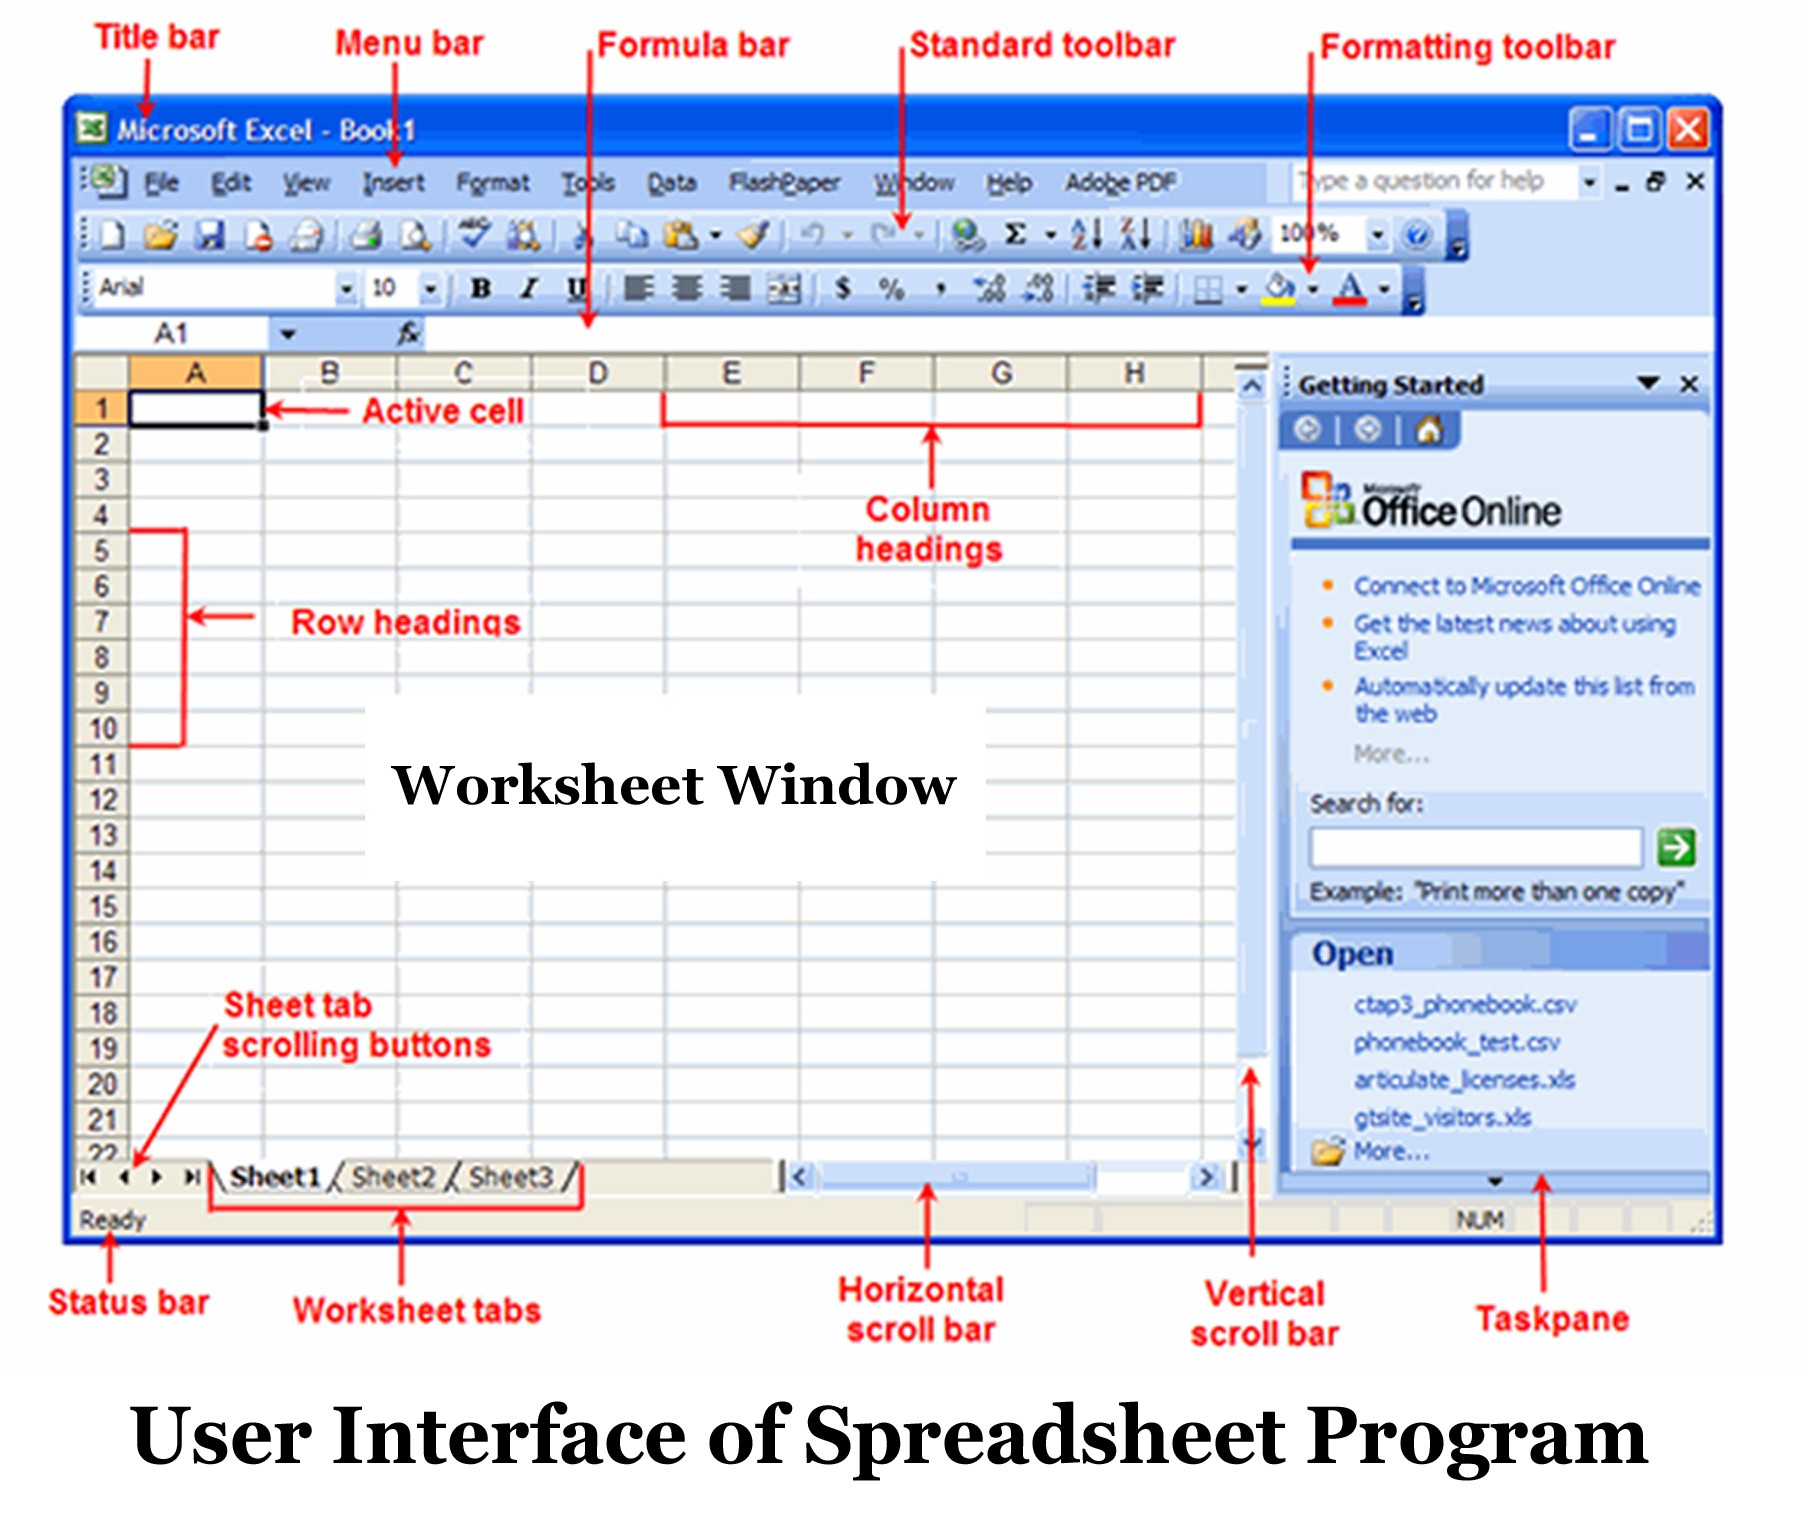 Spreadsheet Its Basic Features And User Interface Document In A Program